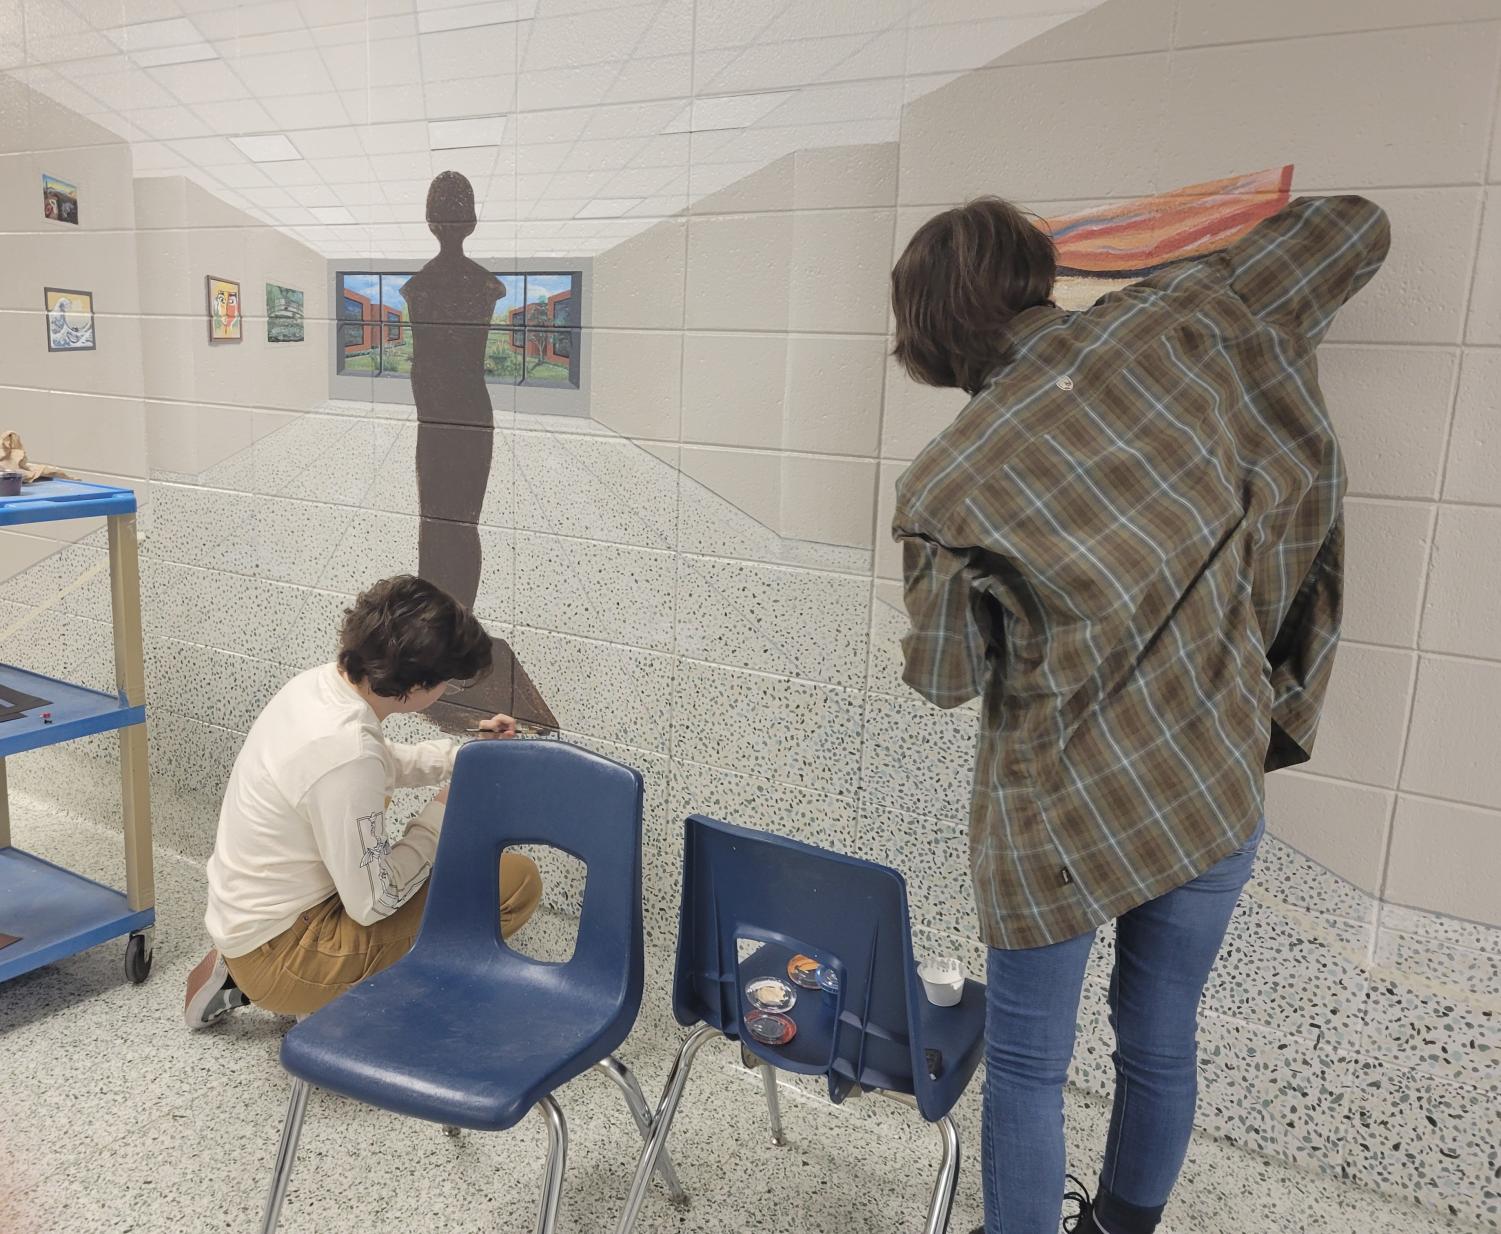 Renaissance club members Isabelle Fisher and Natalie Stiles working on a painting in the art hallway. Photo assisted by Kiara Borges. 